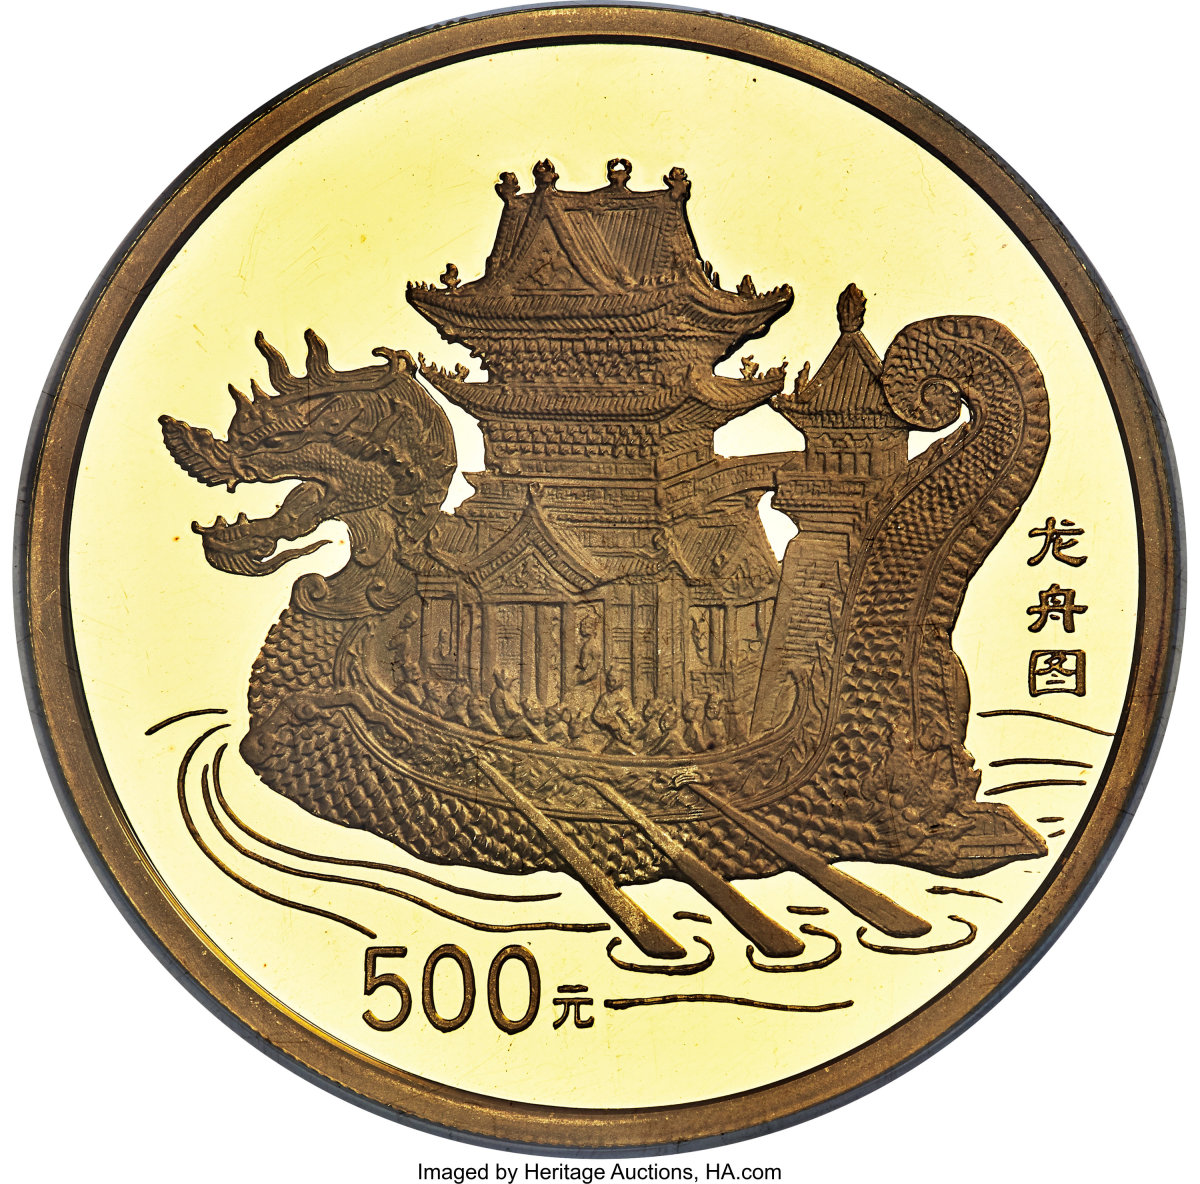 One of 99 People’s Republic 5 oz gold proof 500 yuan of 1995 depicting an ‘Ancient Dragon Boat’ (KM-A823). It secured a new home for $108,000 graded PR69 Ultra Cameo NGC. Image courtesy and © www.ha.com.